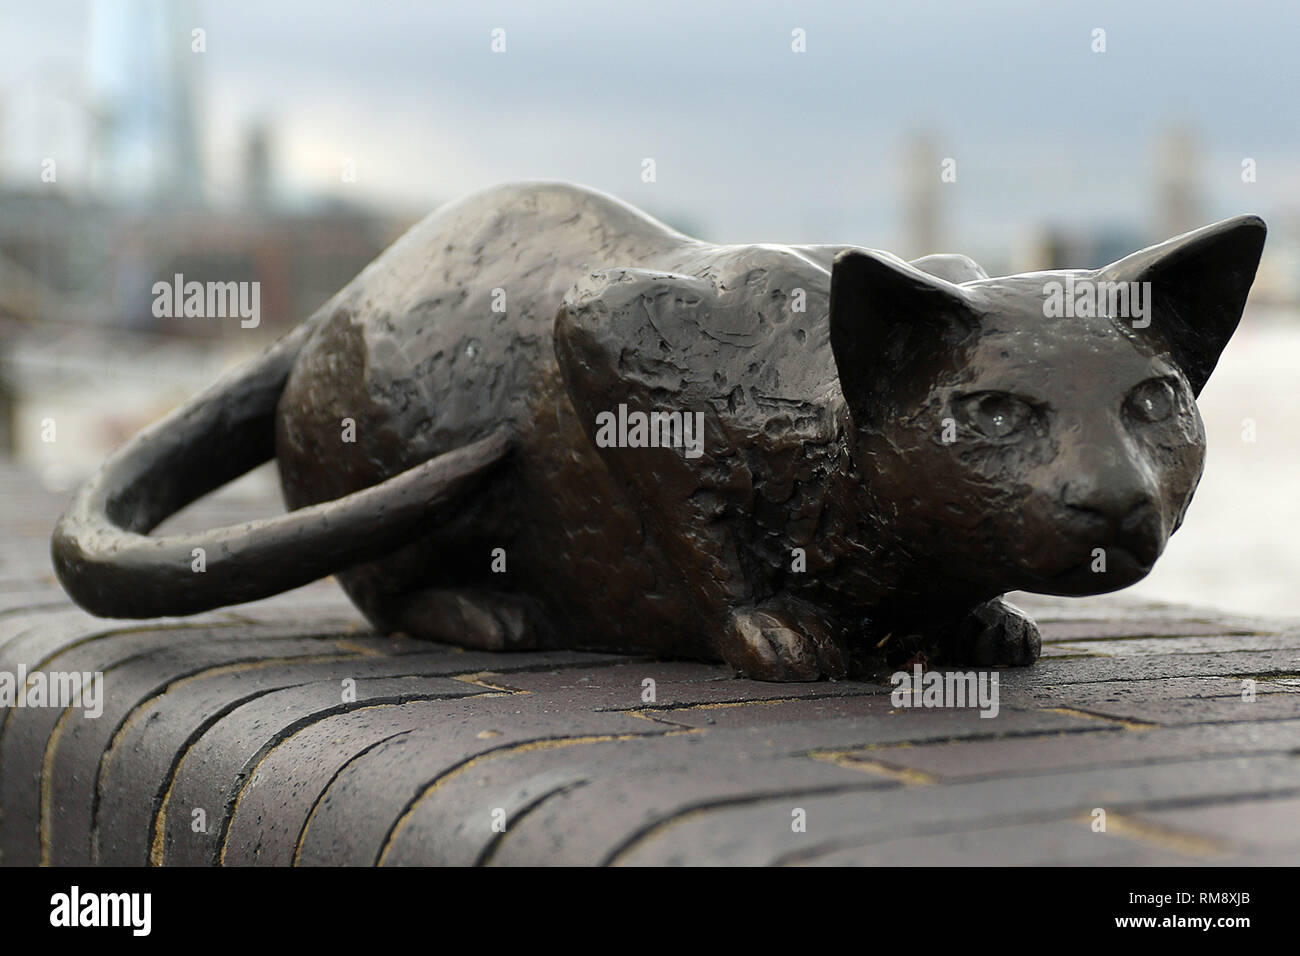 Statue of the cat of Dr Alfred Salter (16 June 1873 – 24 August 1945) in Bermondsey who was a British medical practitioner and Labour Party politician. Stock Photo